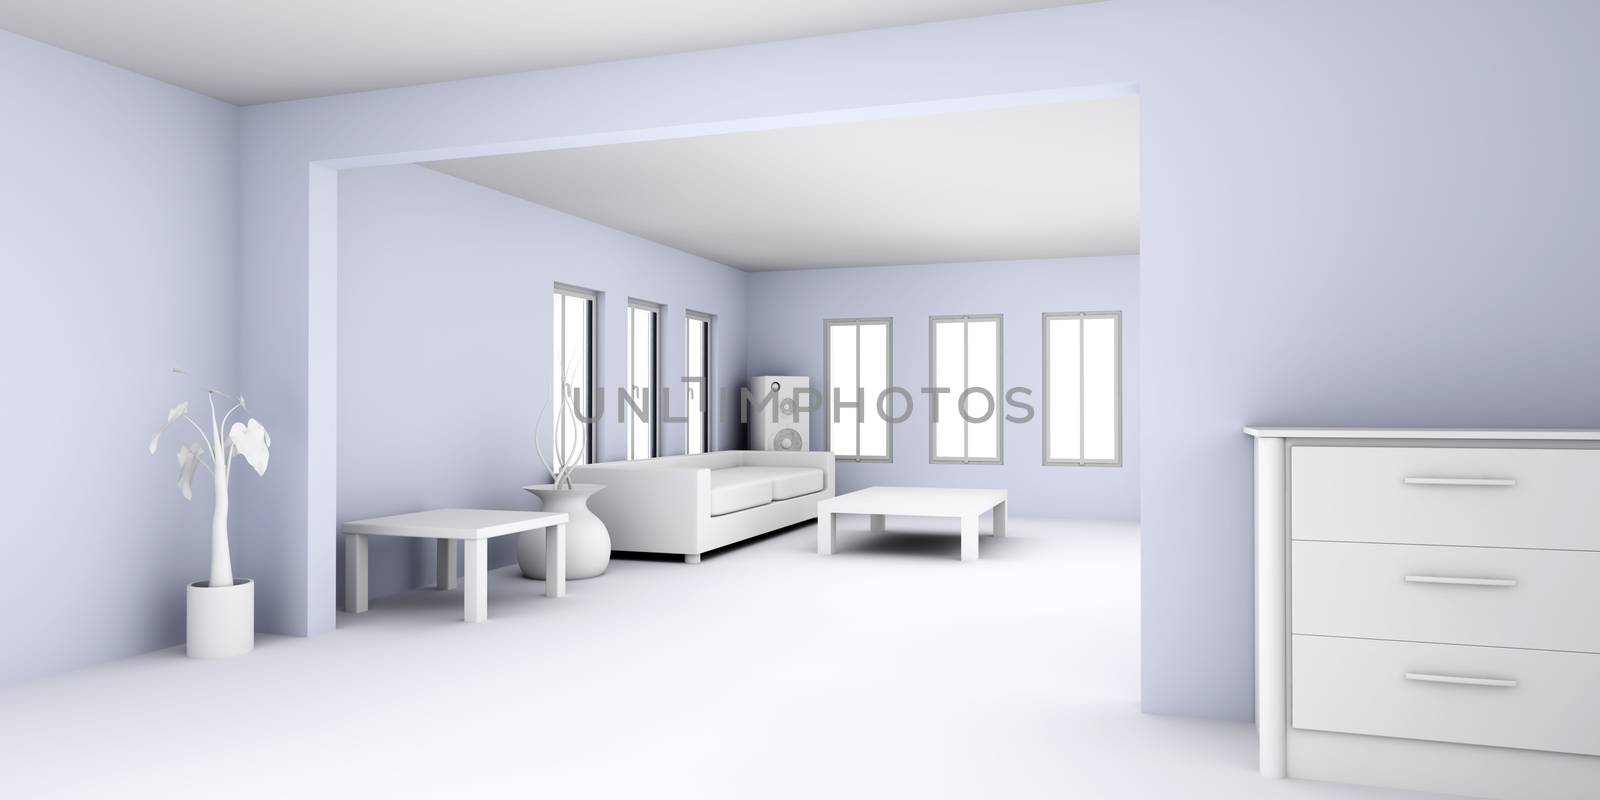 Apartment Interior by Spectral